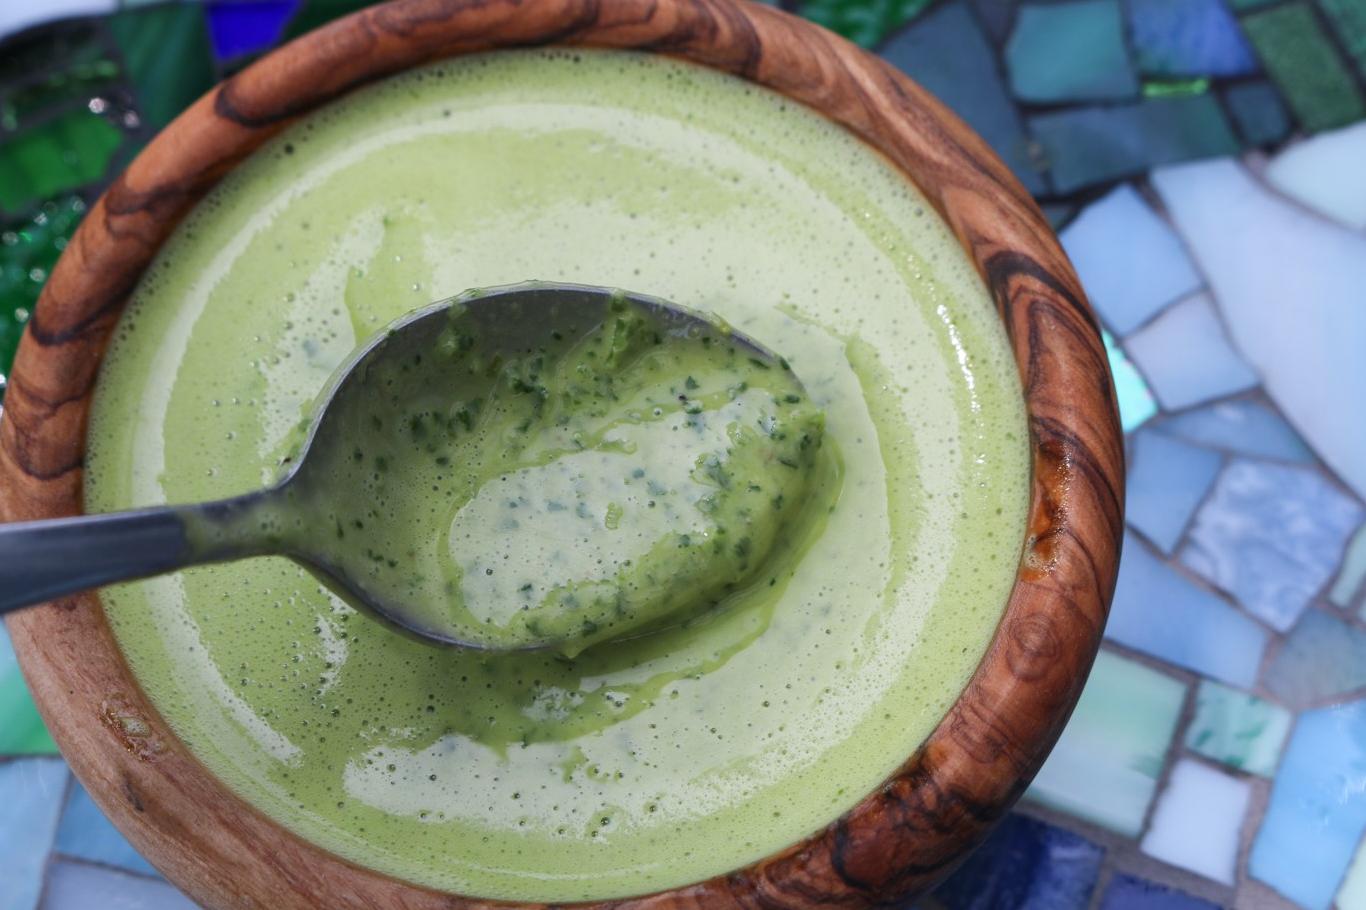  Give your dishes a green makeover with this tasty sauce